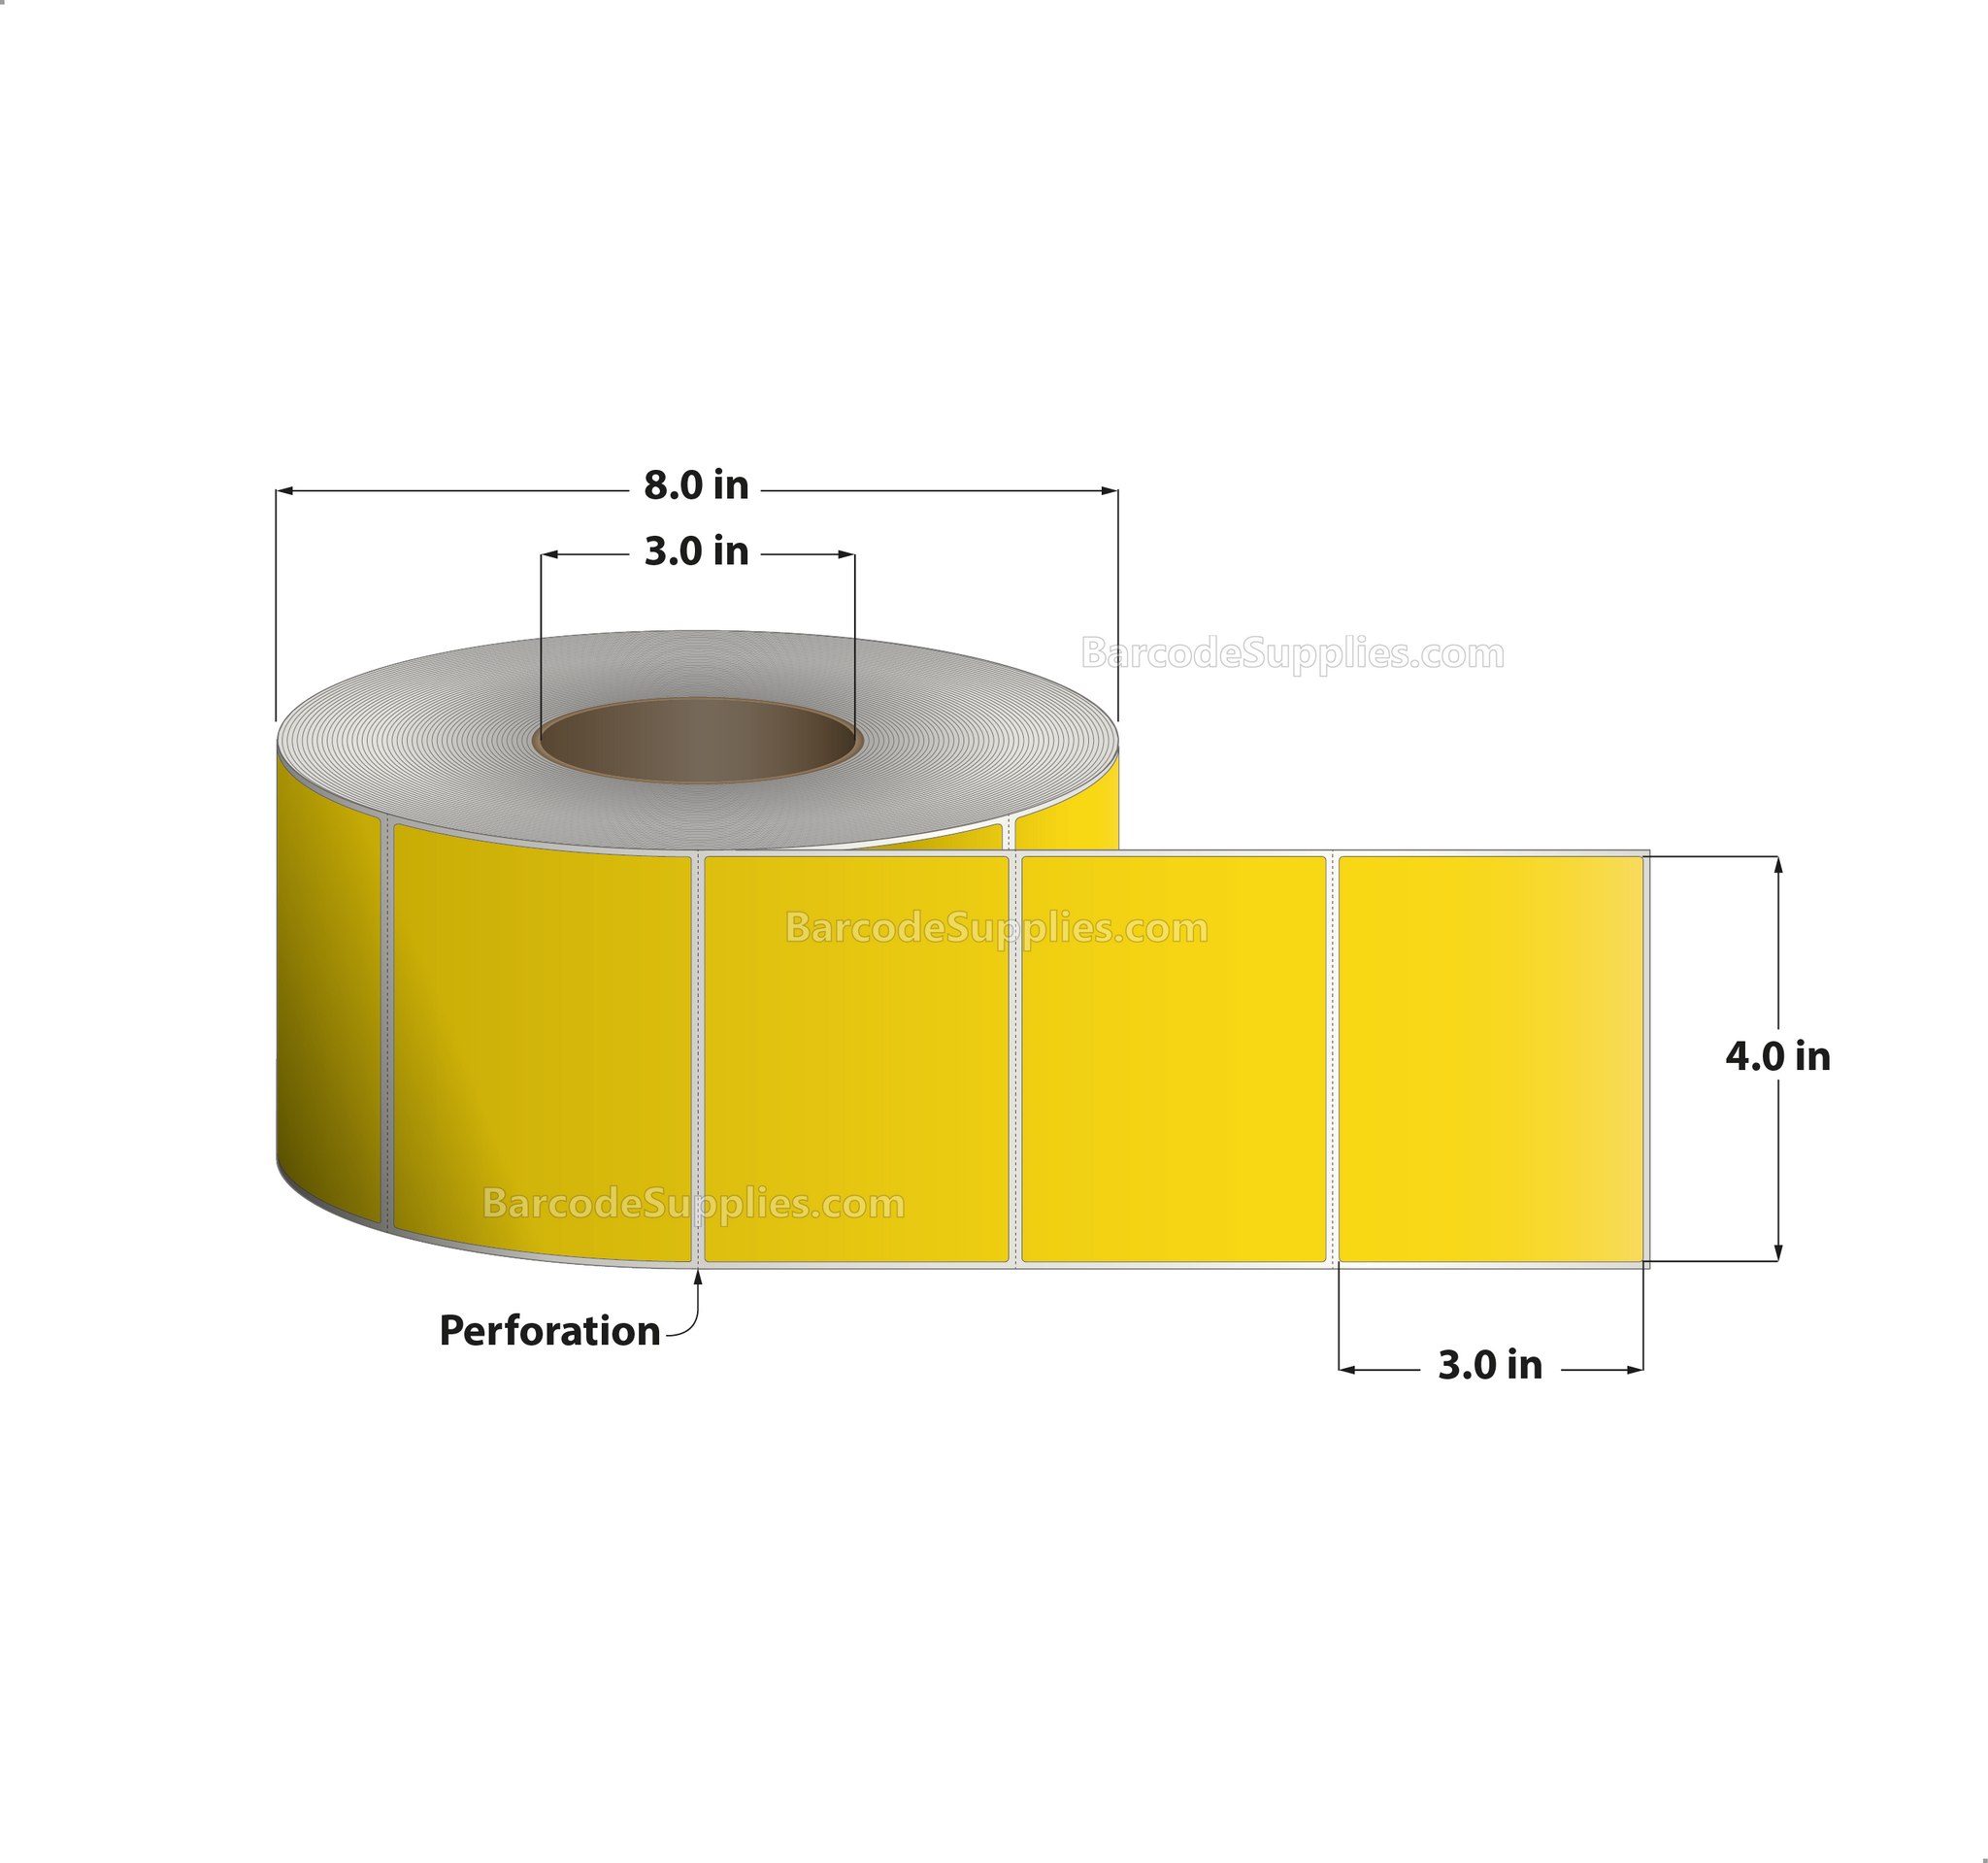 4 x 3 Thermal Transfer Pantone Yellow Labels With Permanent Acrylic Adhesive - Perforated - 1900 Labels Per Roll - Carton Of 4 Rolls - 7600 Labels Total - MPN: TH43-1PY